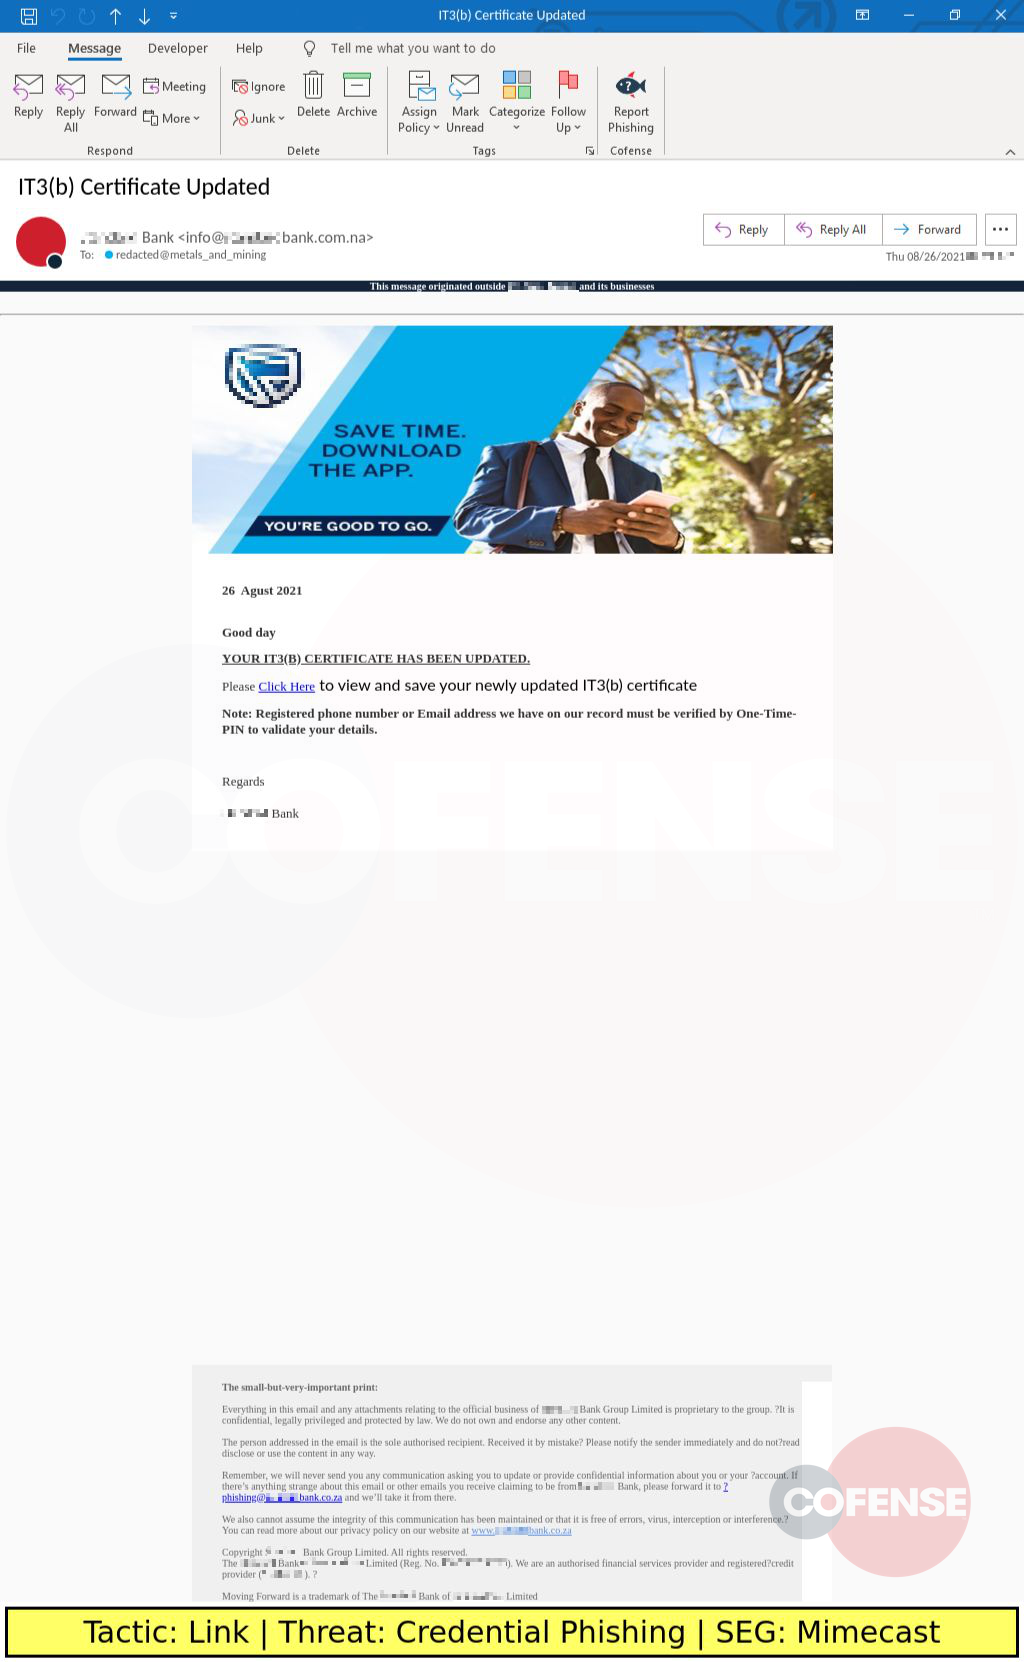 Real Phishing Example: Standard Bank-spoofed emails found in environments protected by Mimecast deliver Credential Phishing via an embedded link.